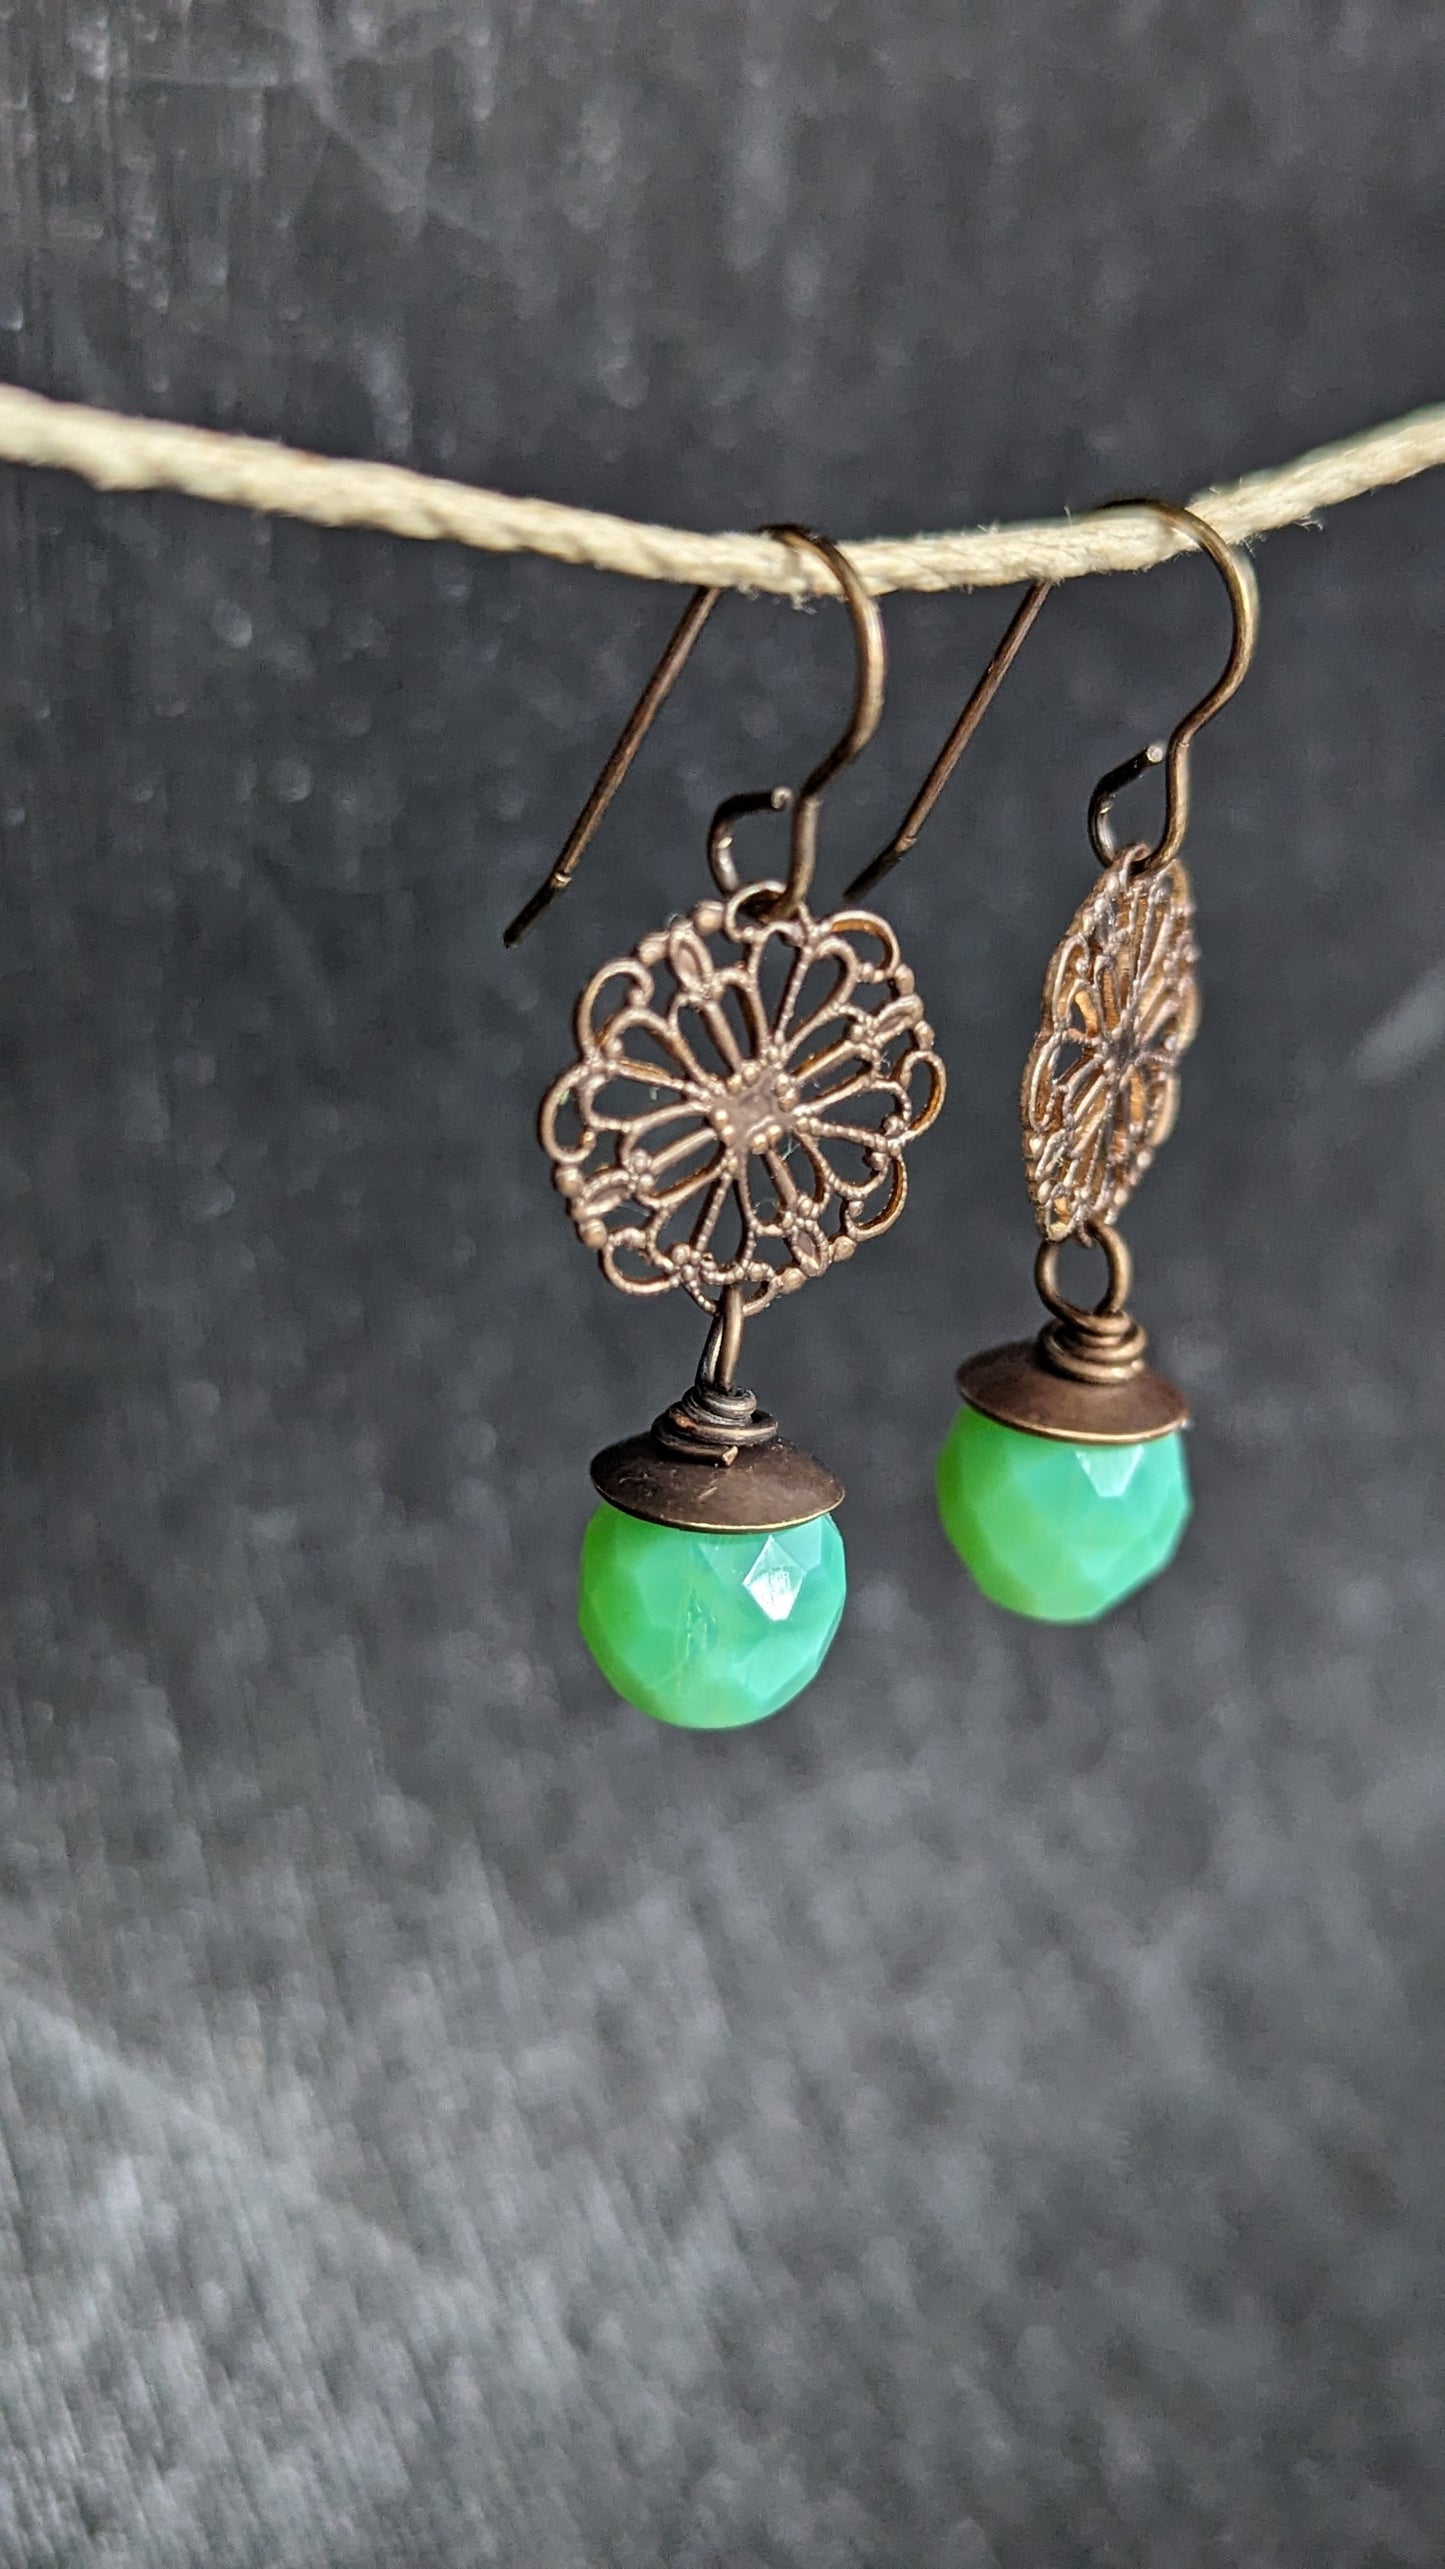 Brass Filigree Earrings with Glass Beads